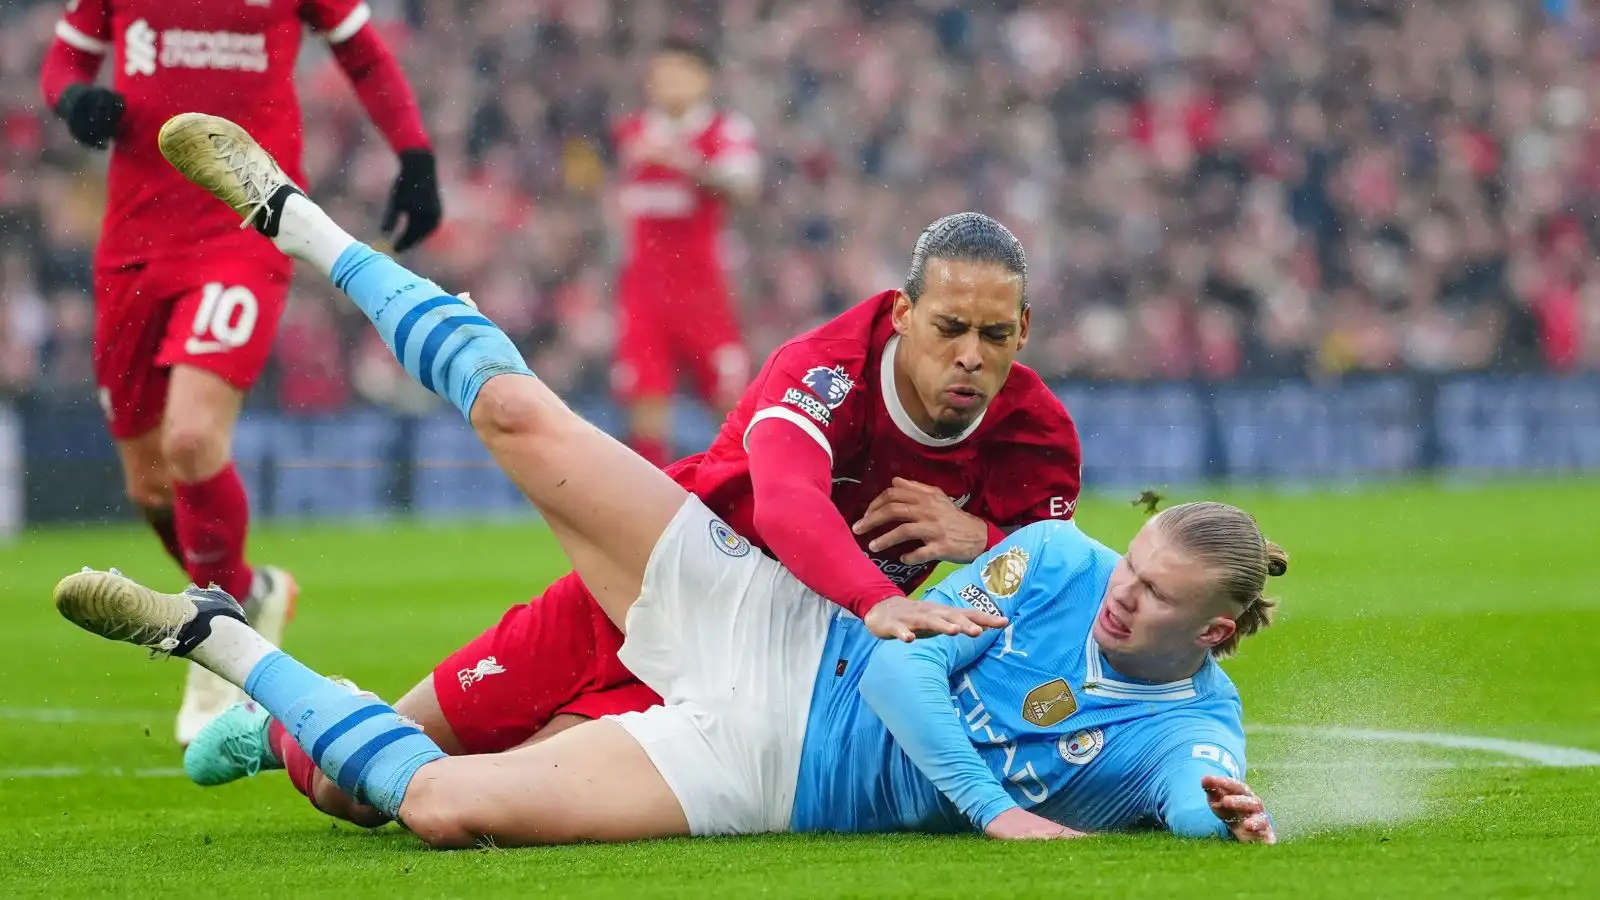 Liverpool protector Virgil van Dijk as well as Male City forward Erling Haaland tumble to the progression throughout a testing-dealt with match at Anfield